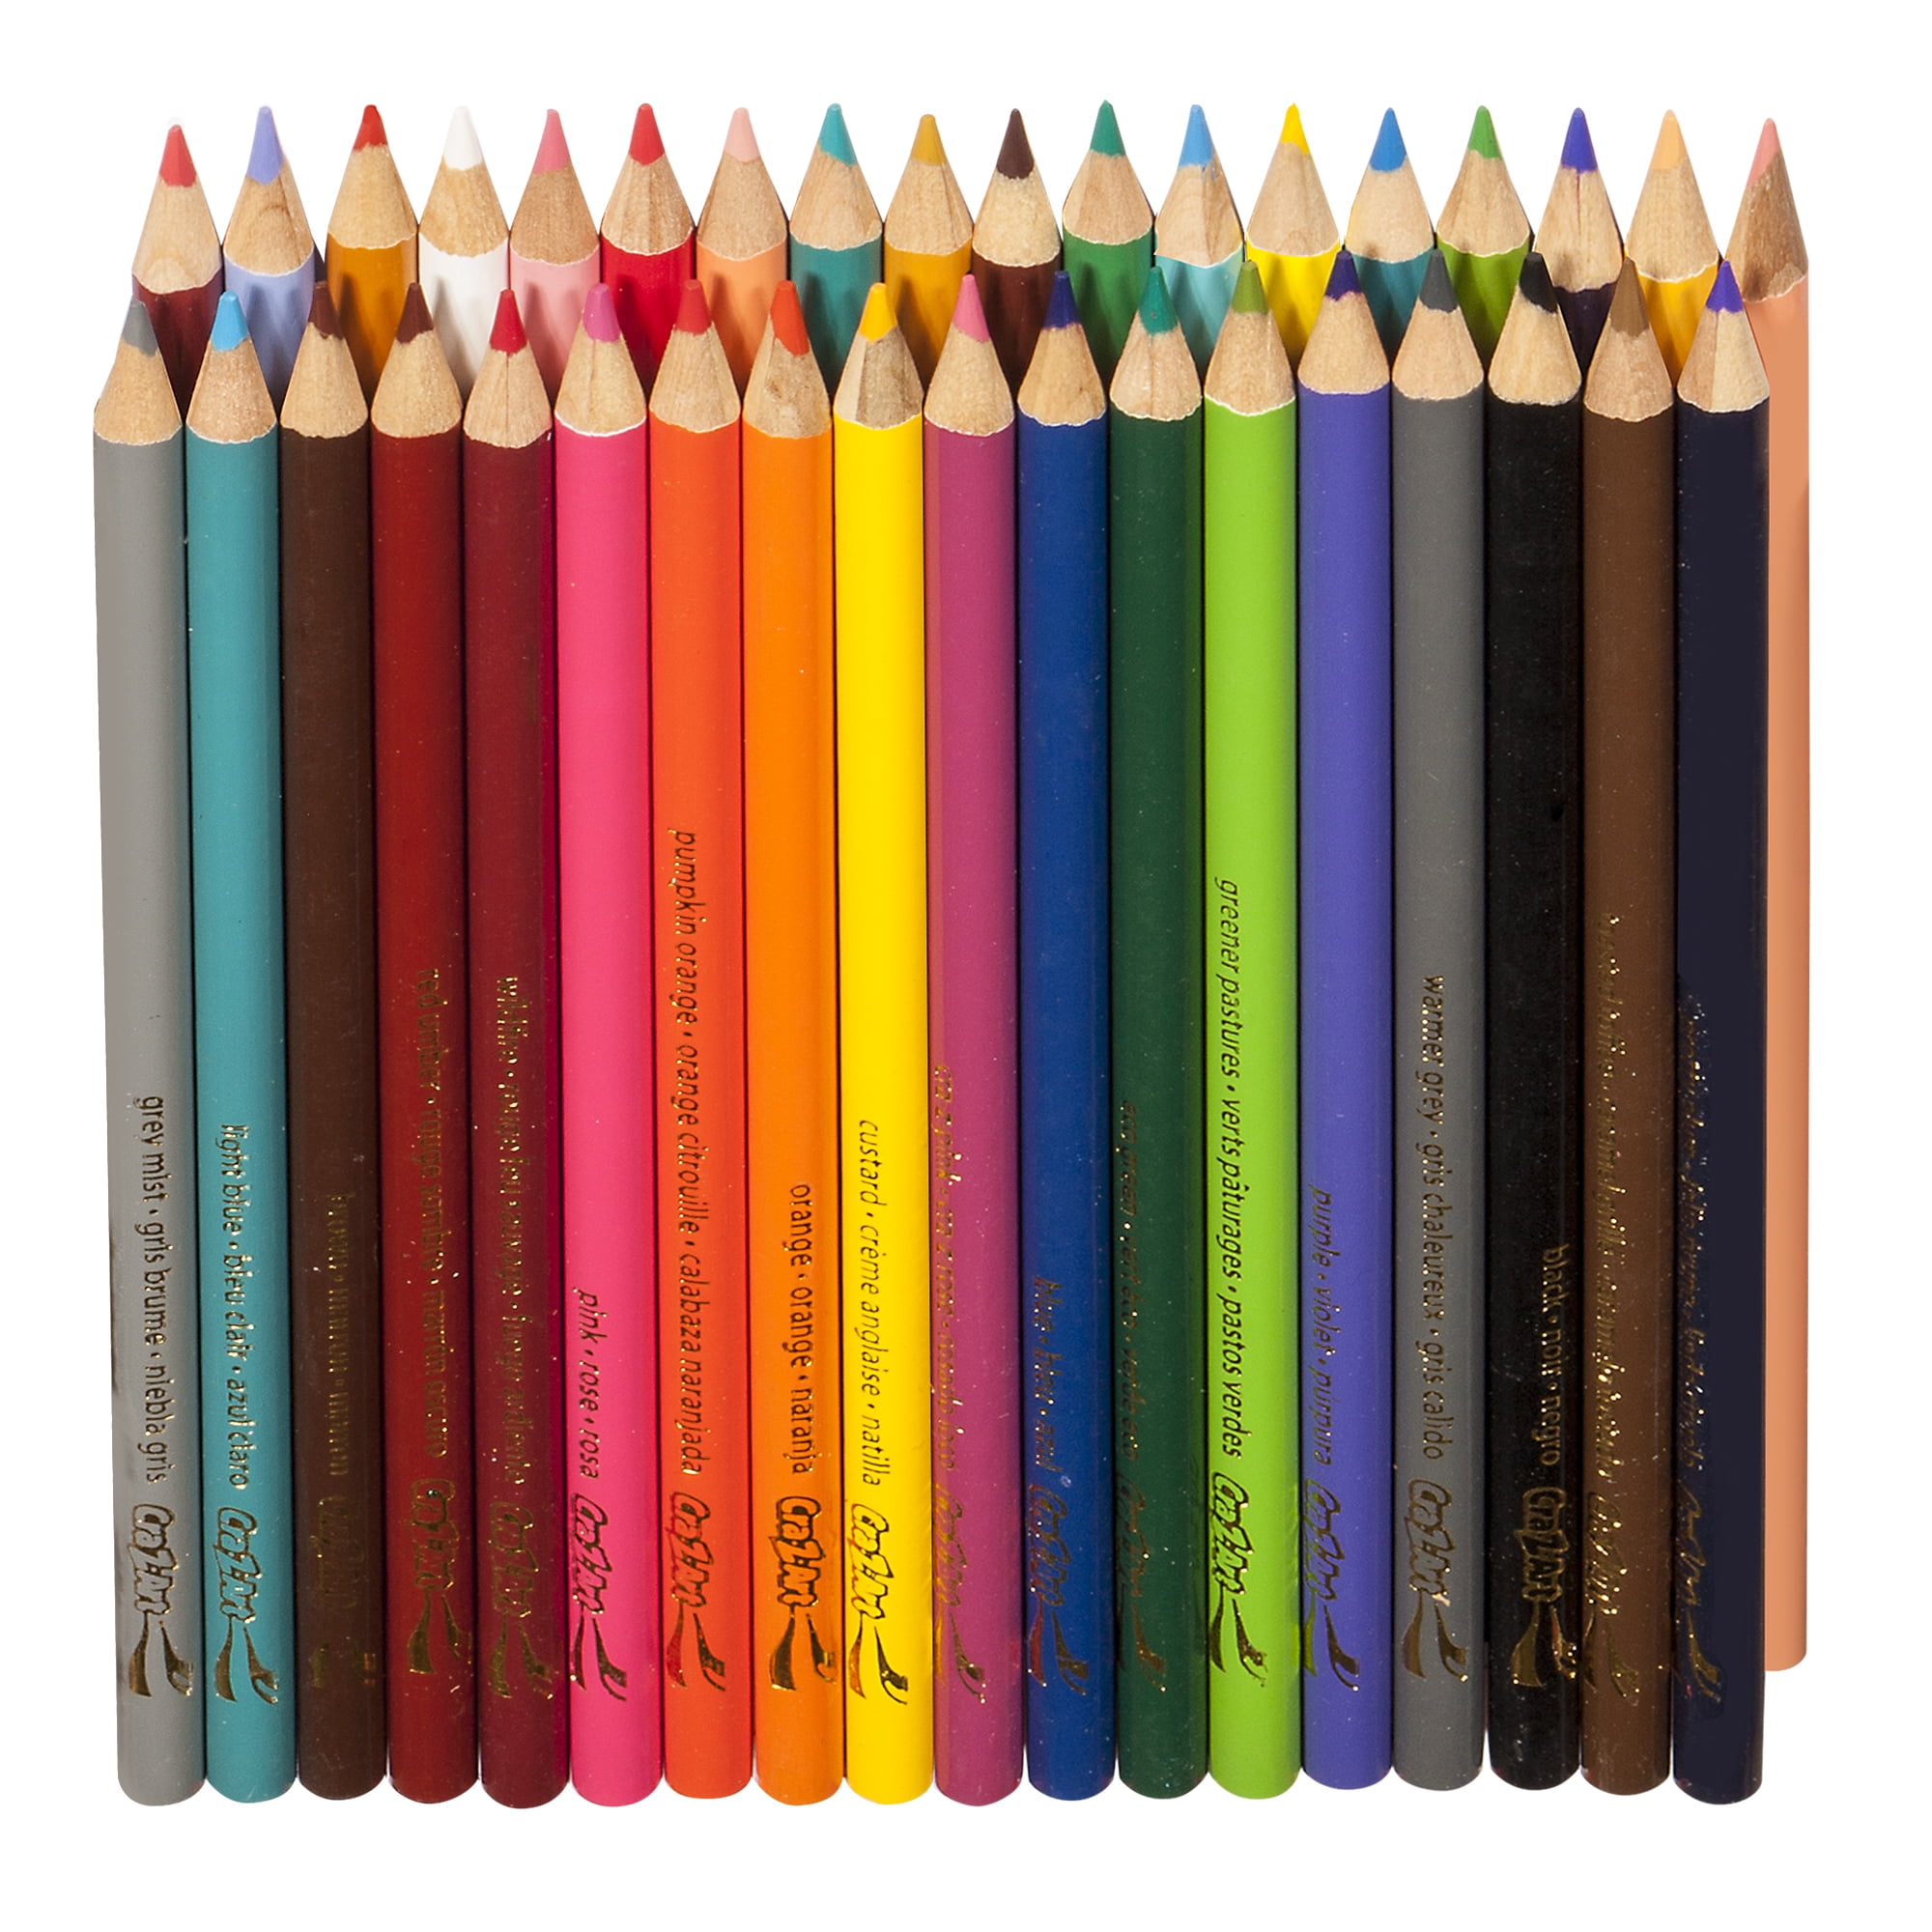 Cra-Z-Art Erasable Colored Pencils 12 Pack, Beginner Child to Adult, Back  to School Supplies